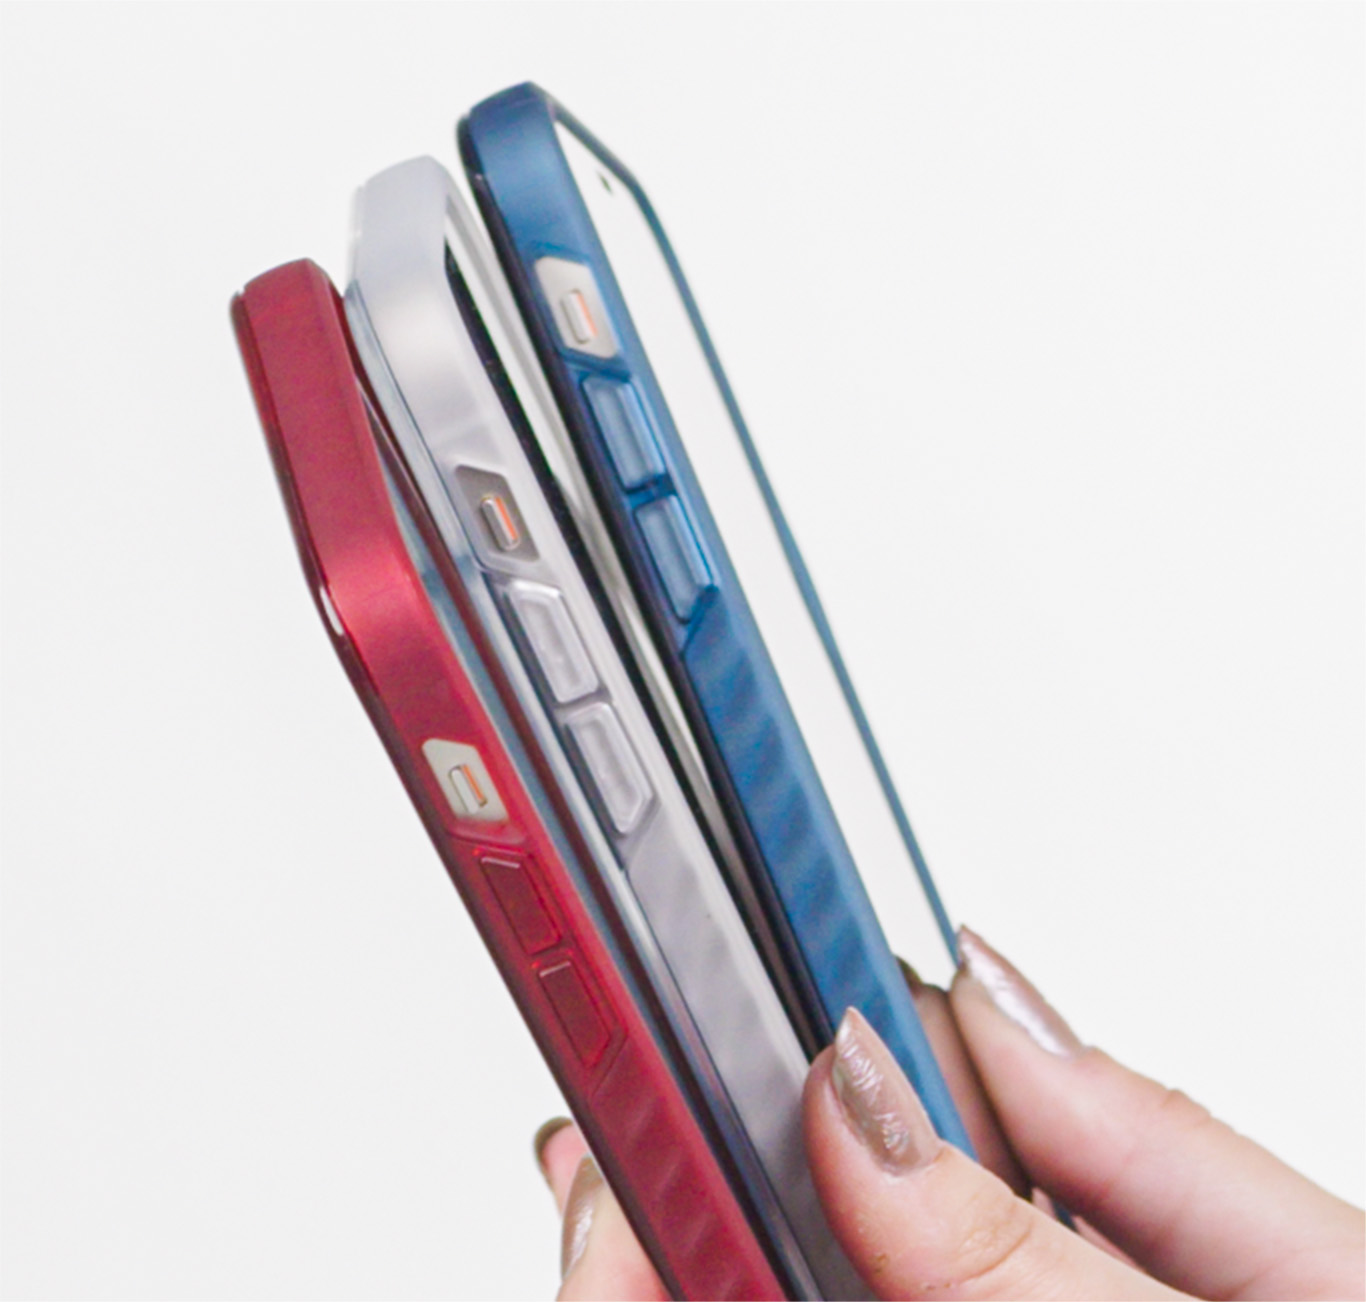 A person holding 3 iPhones with red, white, and blue Bravo cases.